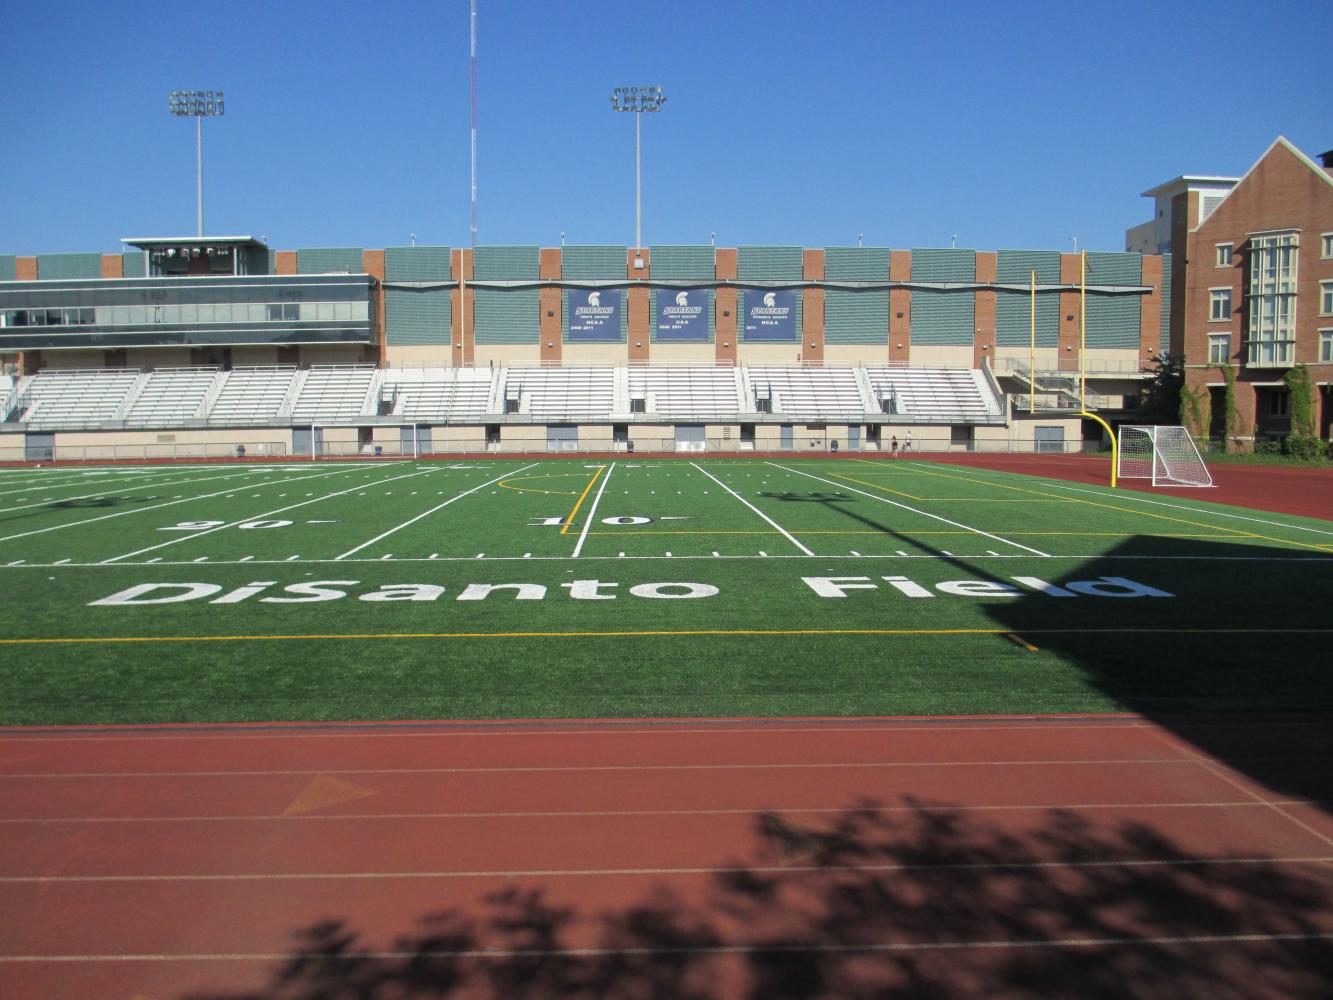 A variety of sports teams practice and play on DiSanto Field, including football, soccer and track and field.